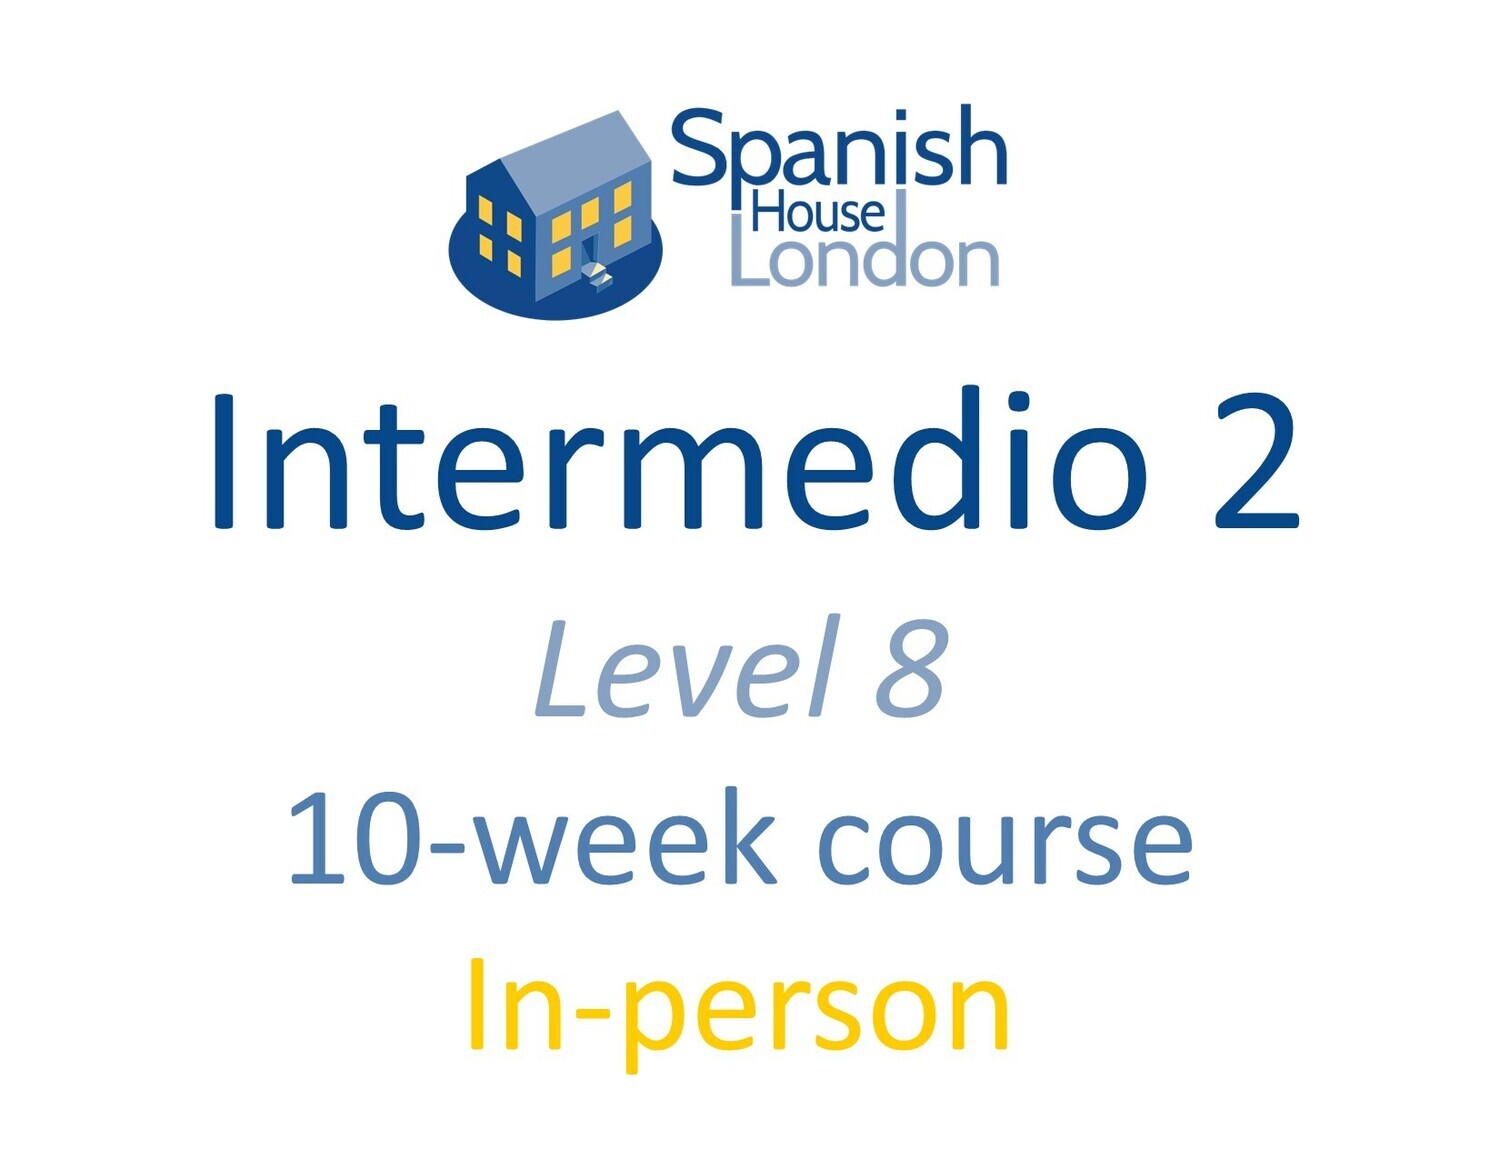 Intermedio 2 Course starting on 17th November at 7.30pm in Euston / King's Cross